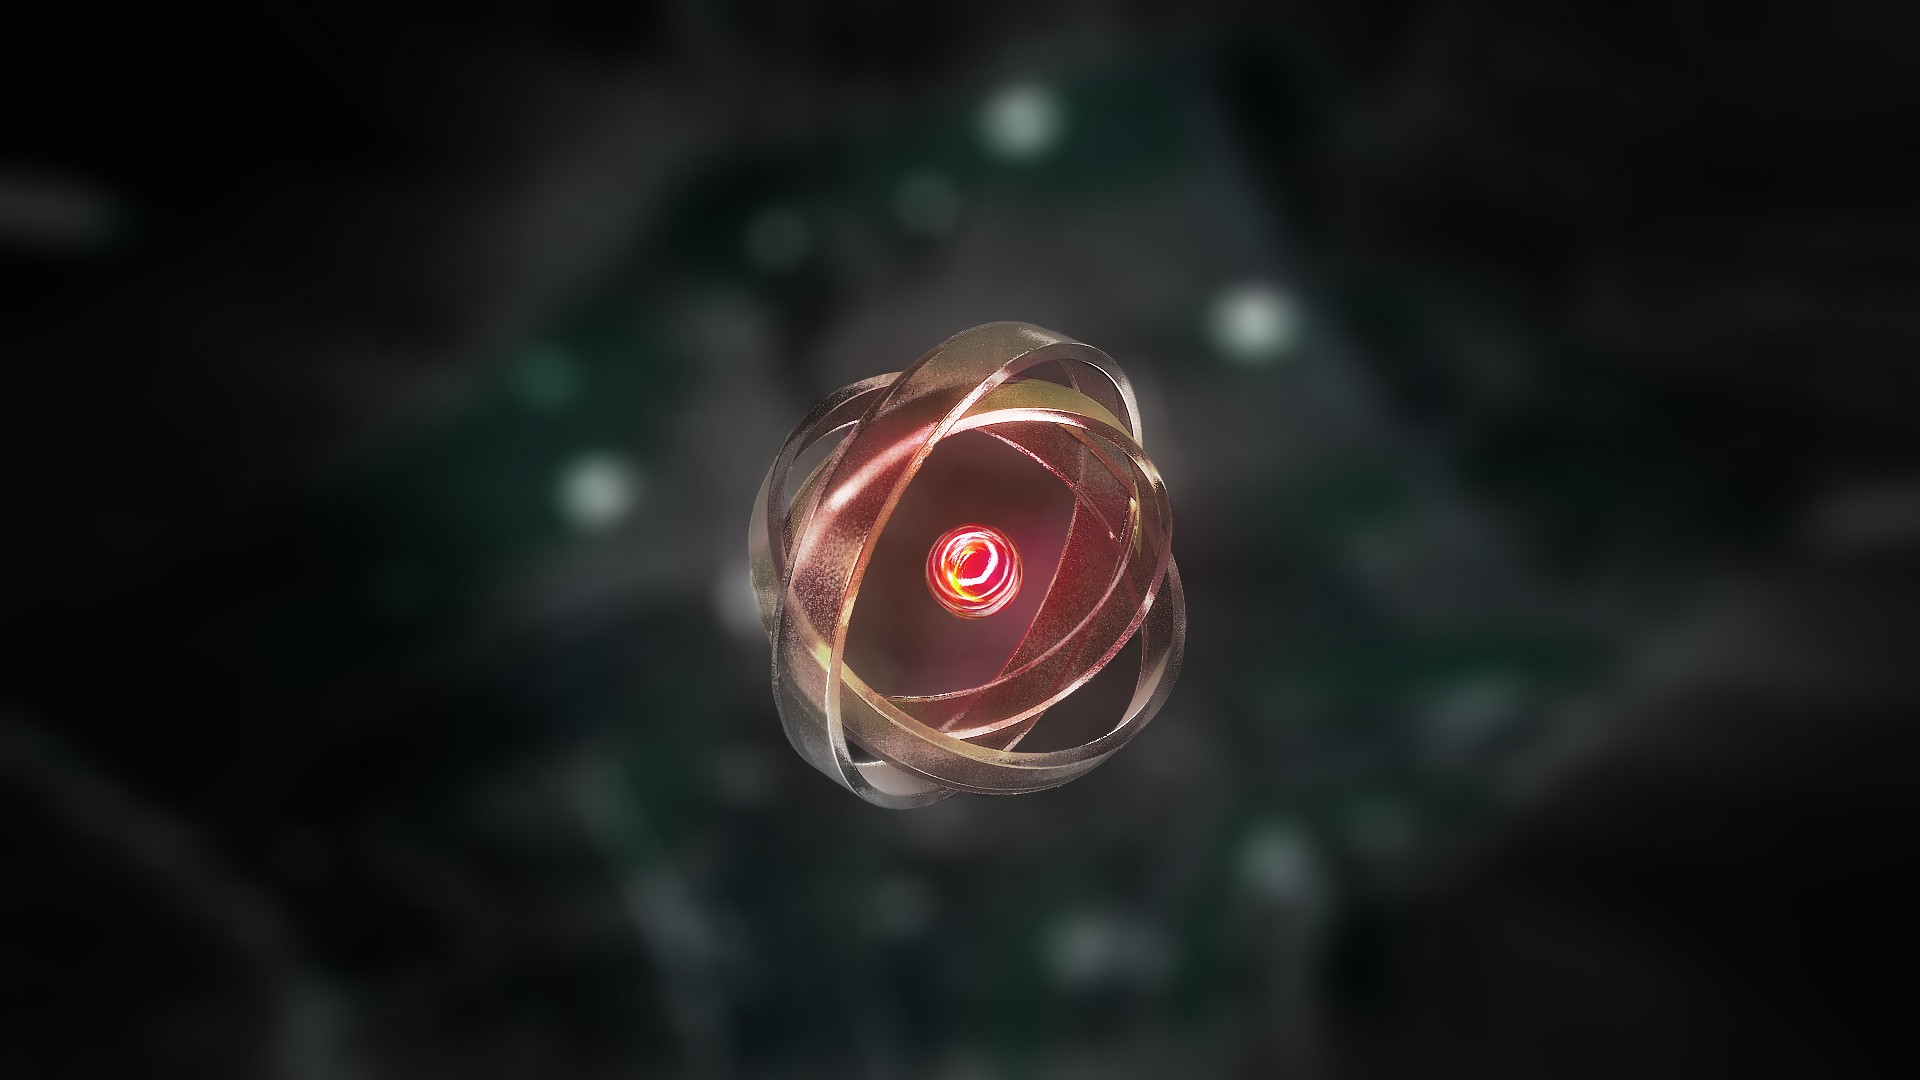 Blurred Abstract 3D Rings Atoms Digital Art 1920x1080